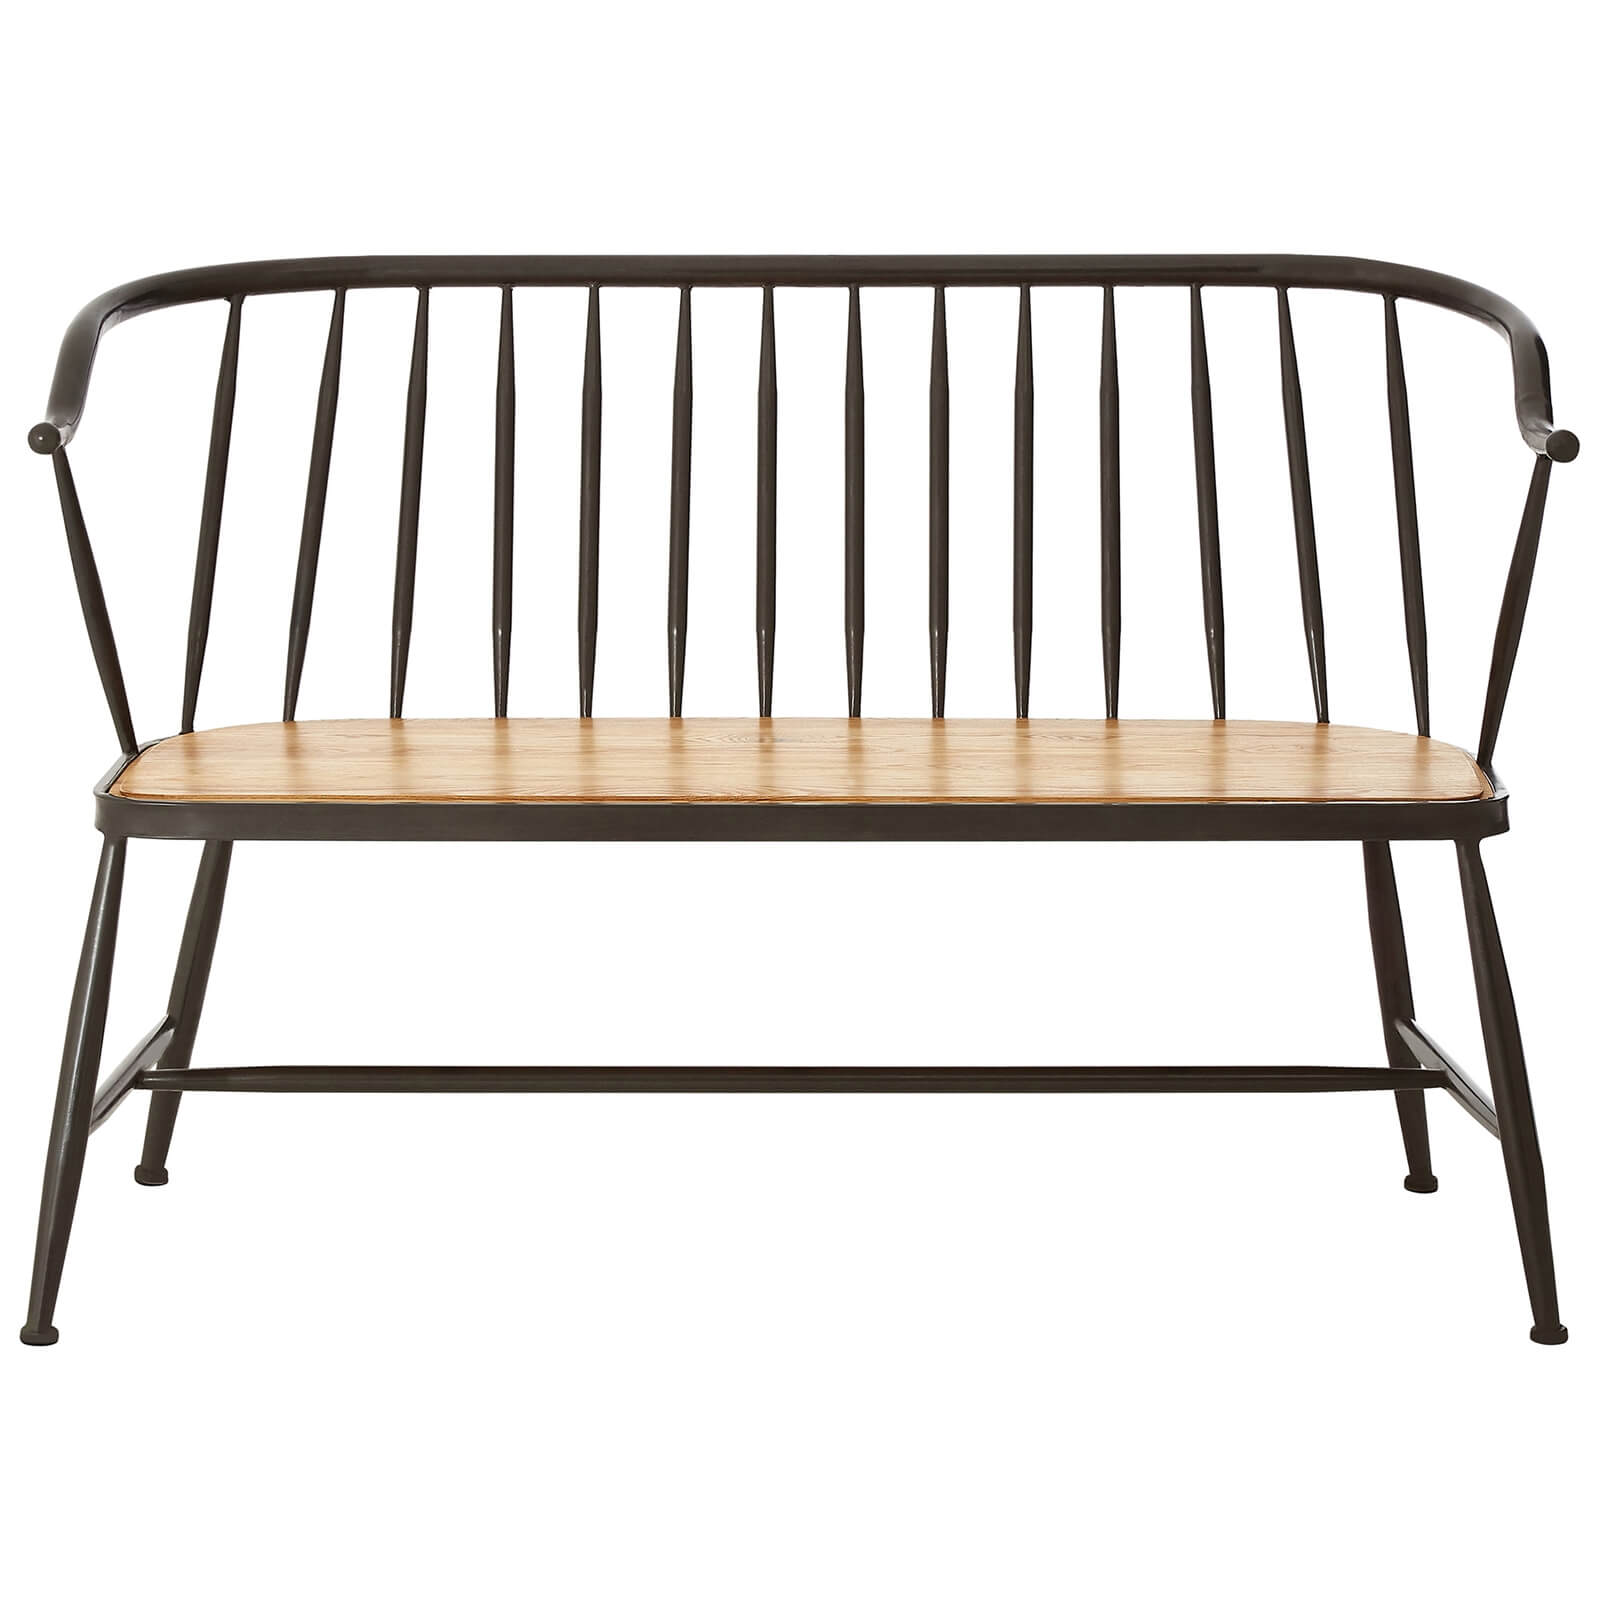 New Foundry Wood and Metal Bench Chair